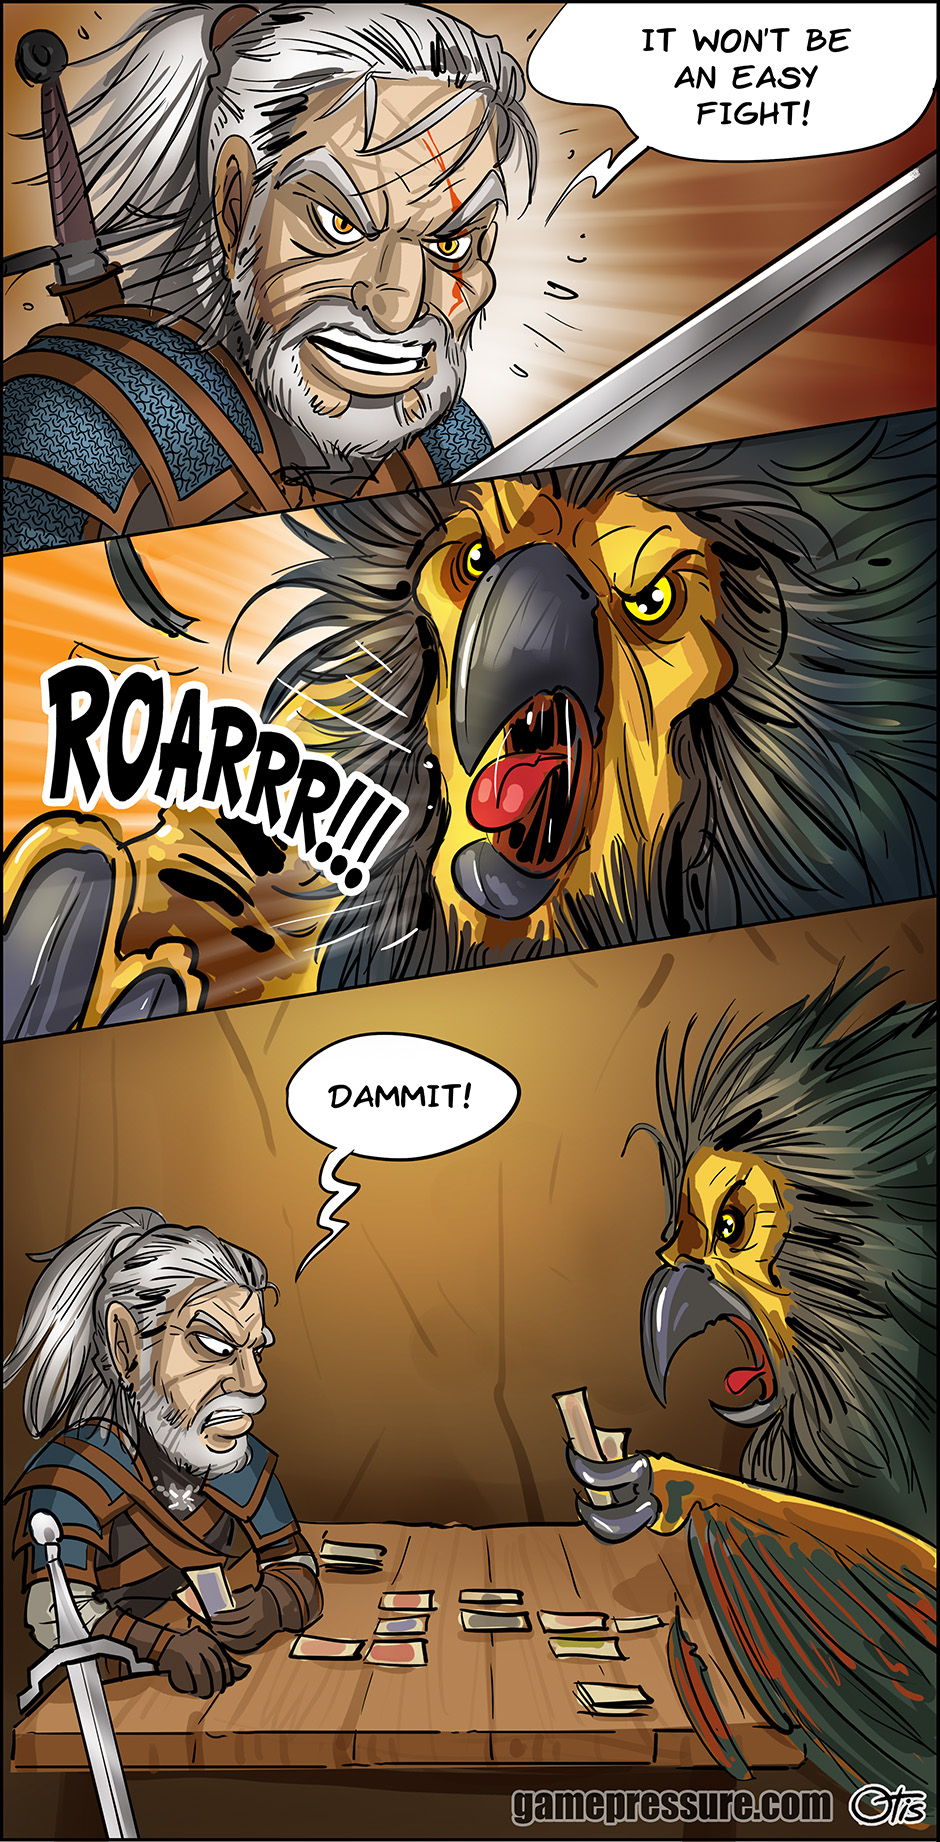 Geralt faces a dangerous monster, comics Cartoon Games, #218. The life of a witcher is not an easy one. Geralt faces dangerous opponents every day.